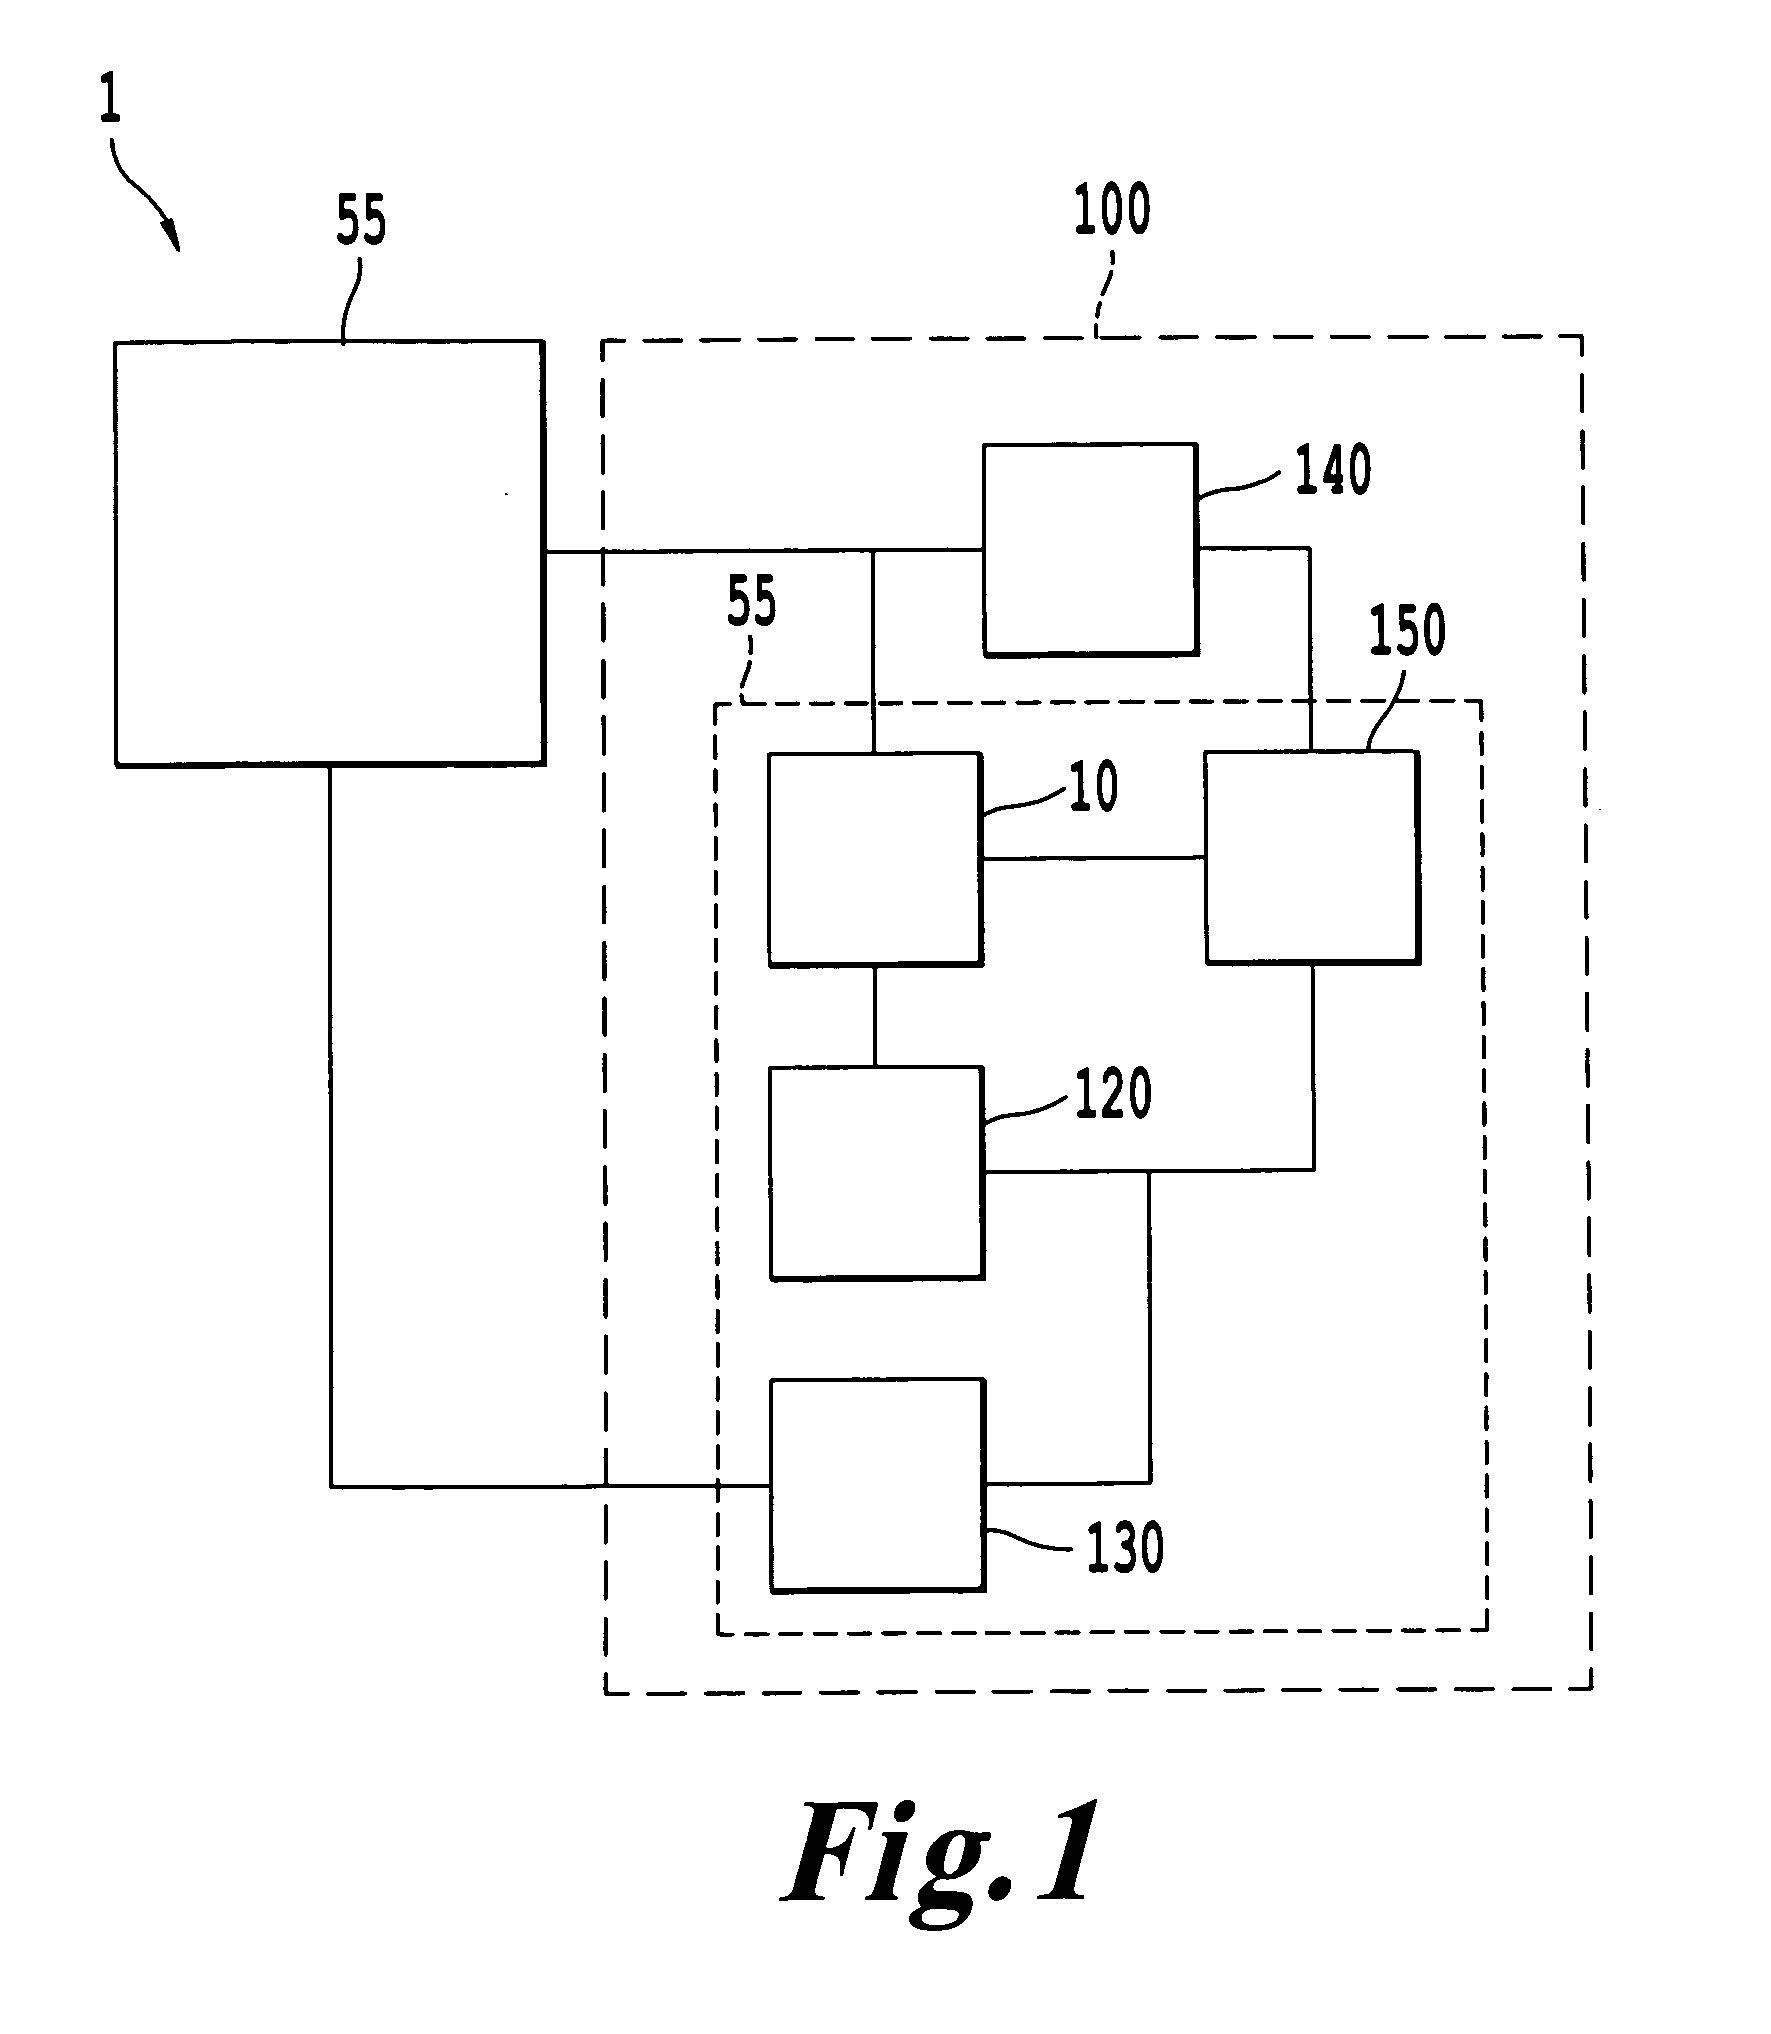 Controlling a material processing tool and performance data